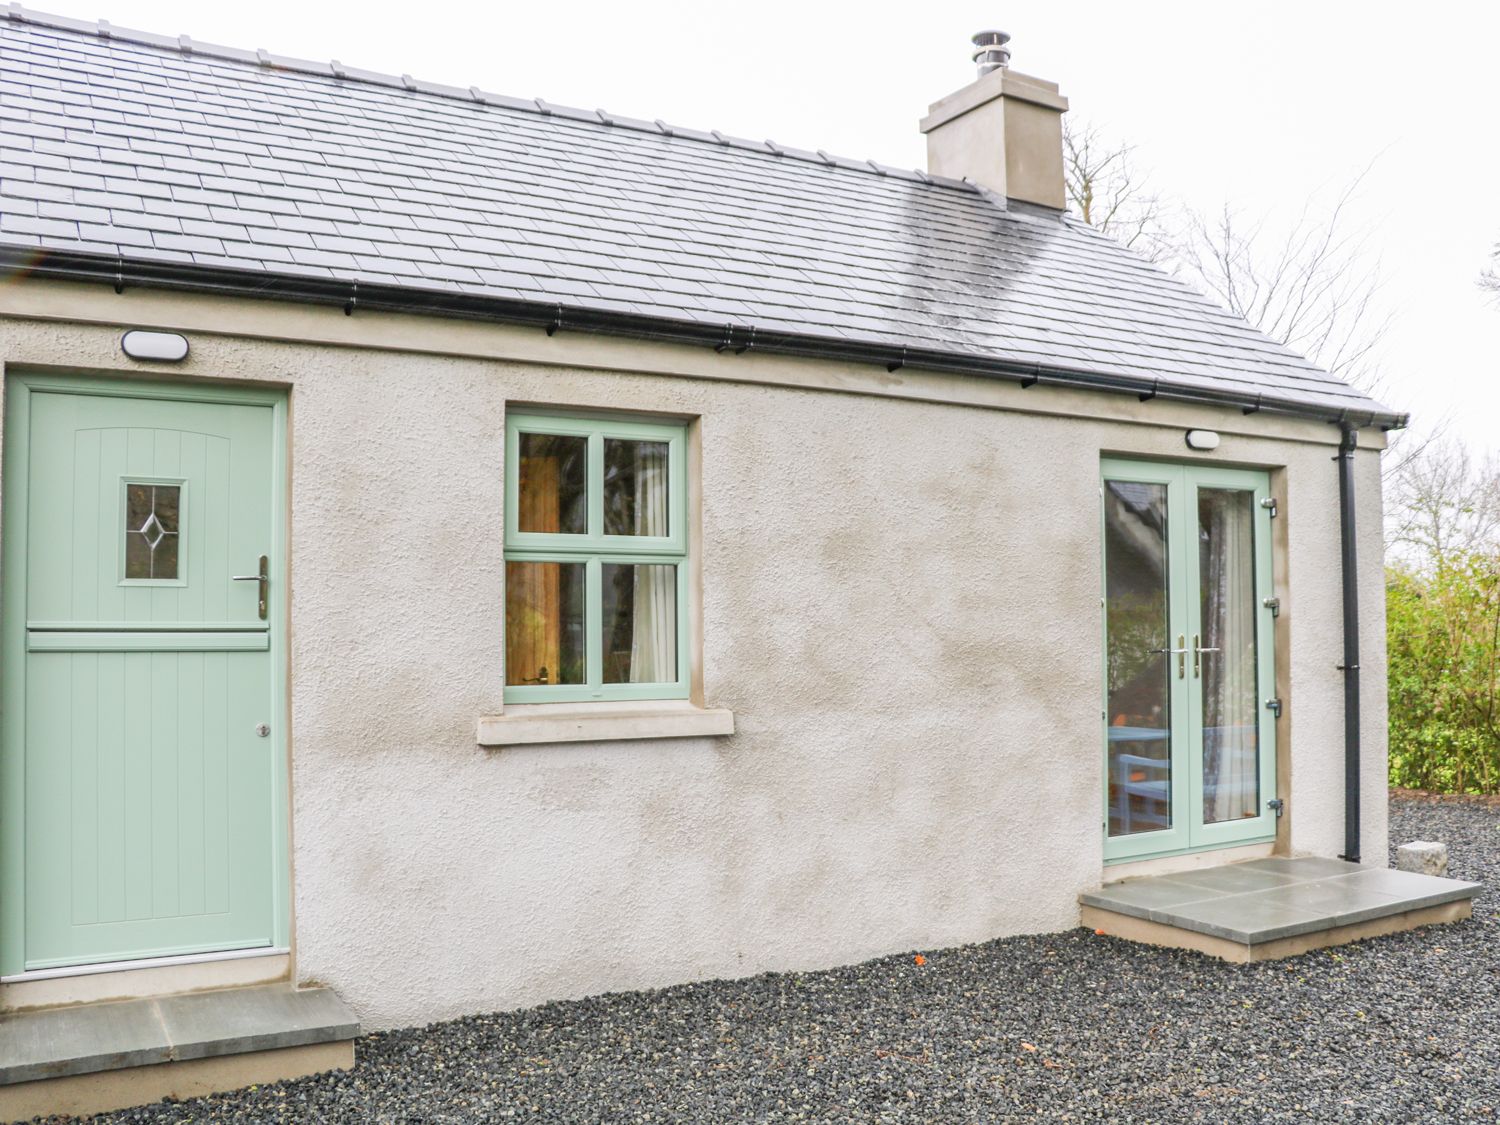 Minnie's Cottage, Killeavy, County Armagh 